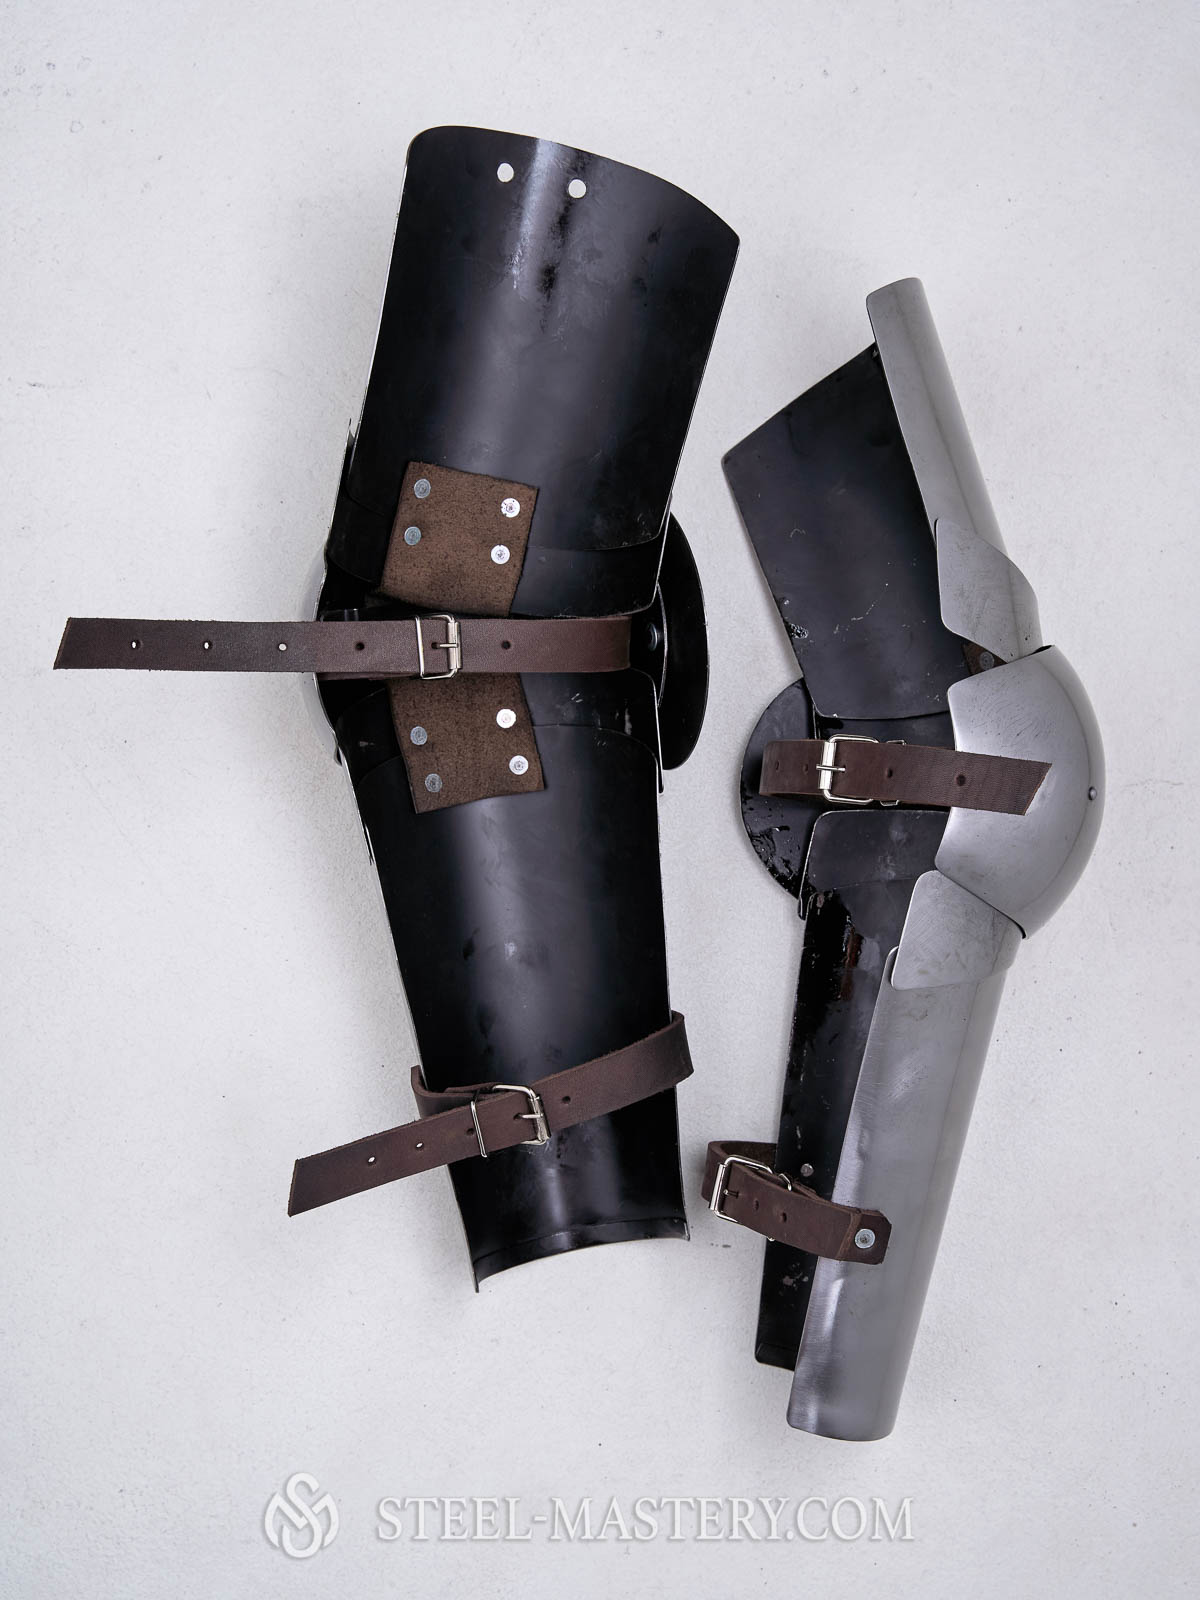 Sca Leather Armor - Medieval Armor Crown - Steel or Brass - SCA